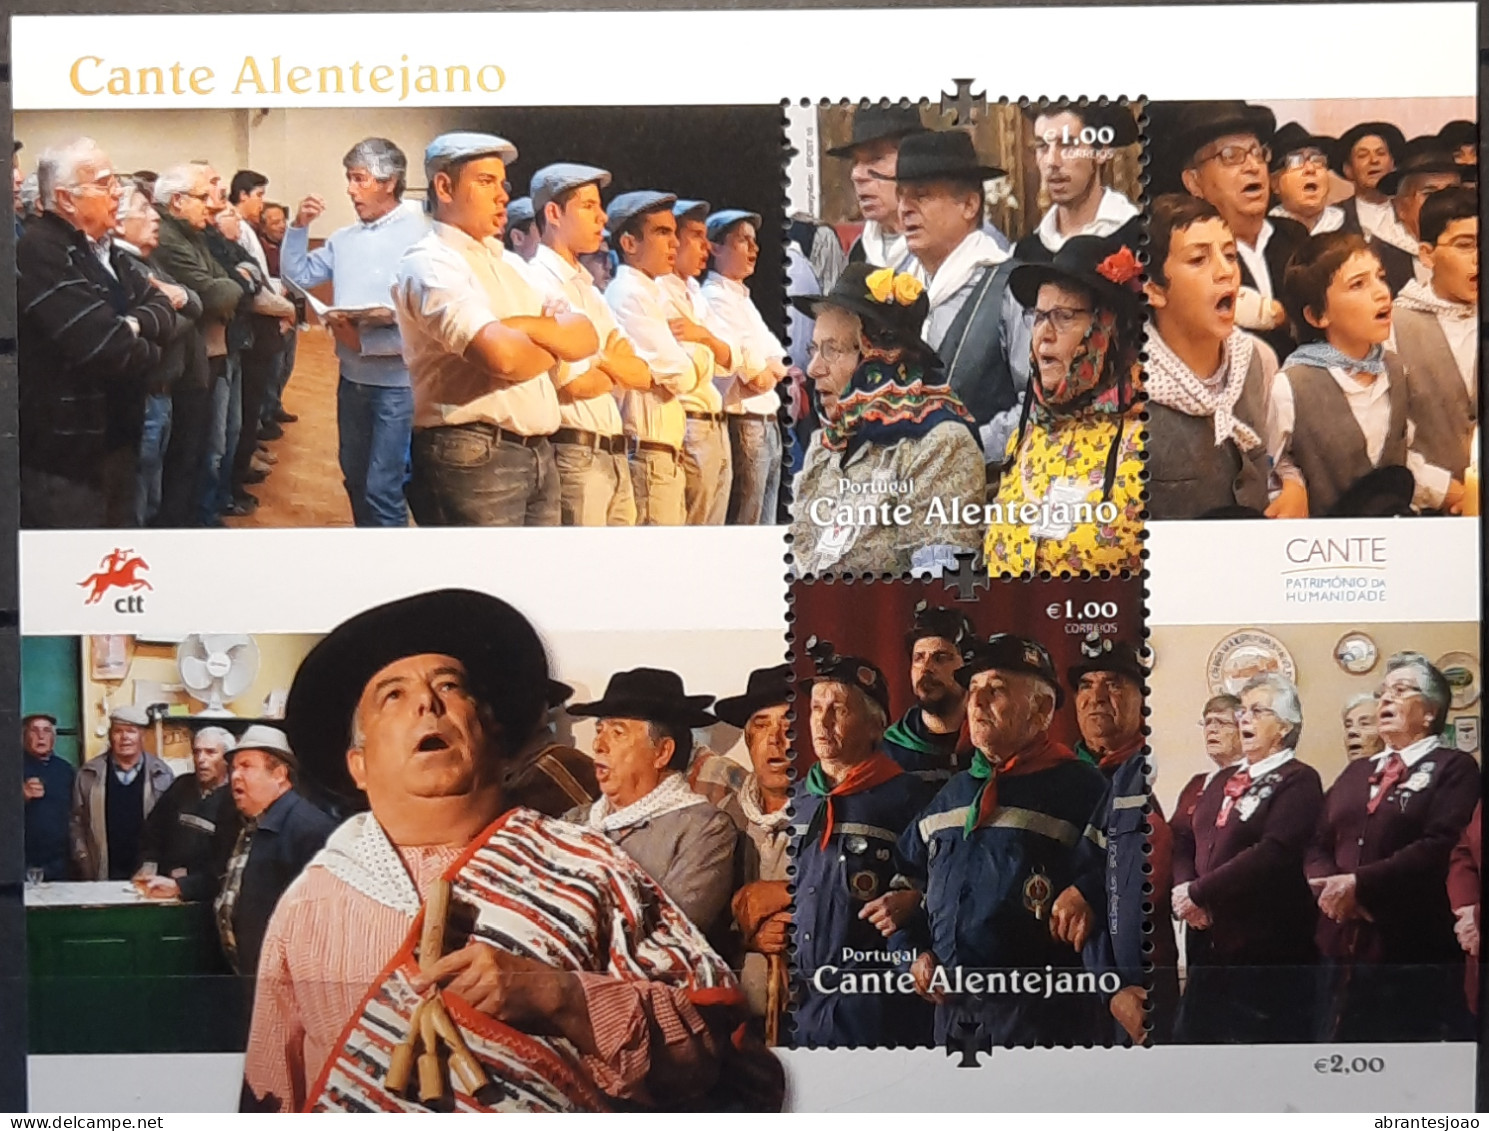 2016 - Portugal - MNH - Songs Of Alentejo - Cante Alentejano - 2 Stamps + Souvenir Sheet Of 1 Stamp - Unused Stamps